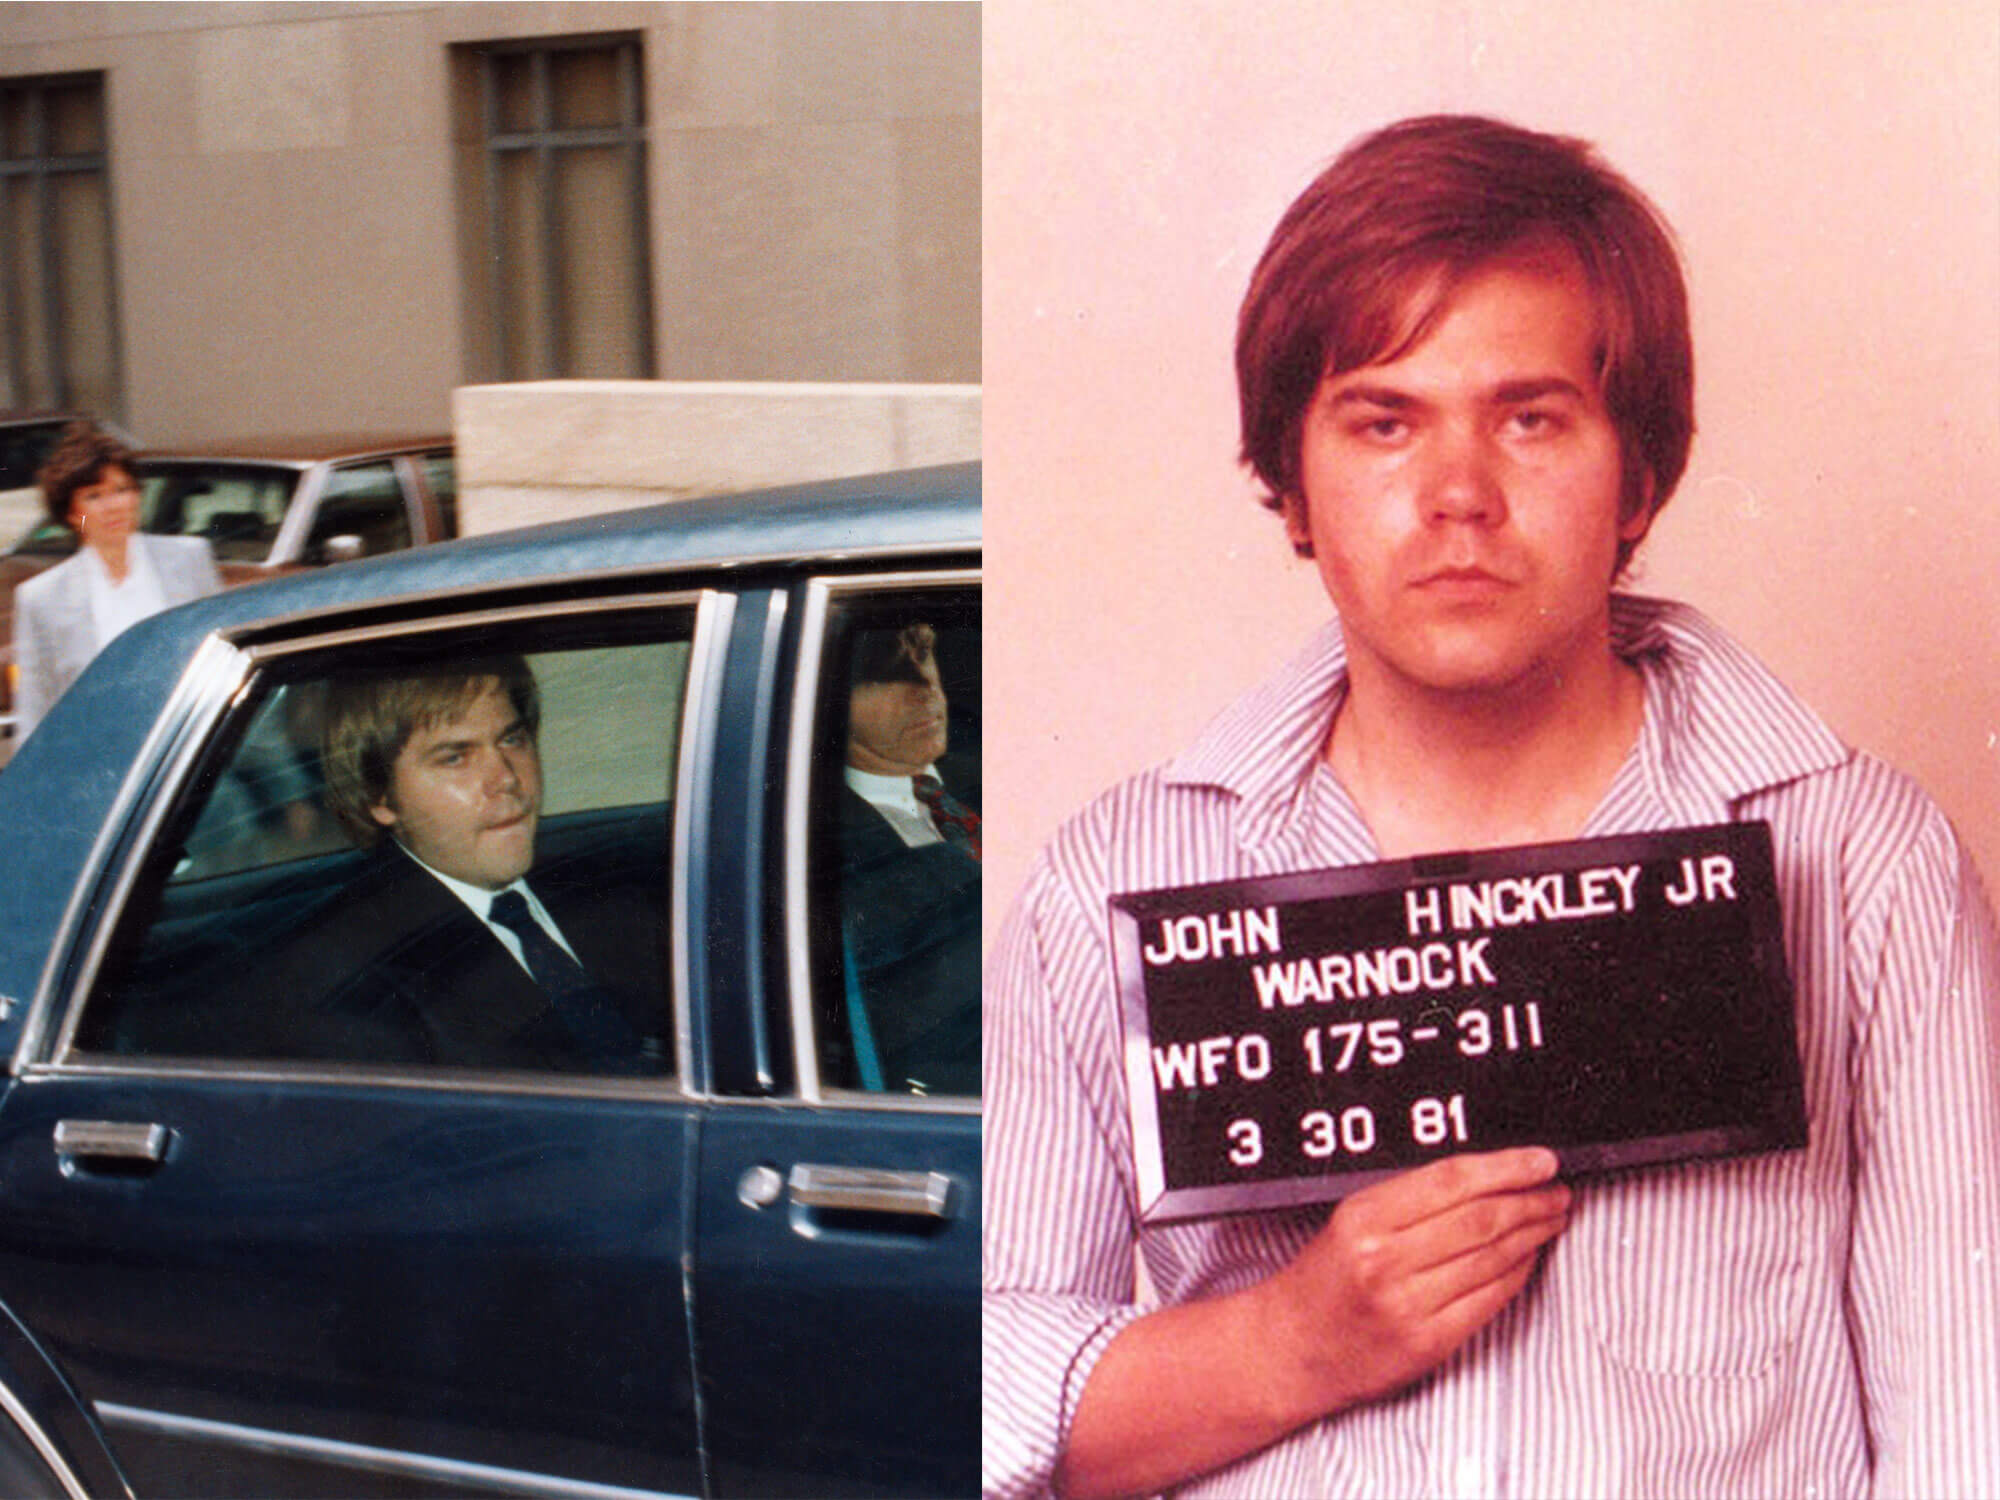 John Hinckley Jr Who Shot And Nearly Killed Ronald Reagan Releases 10 Songs On Spotify